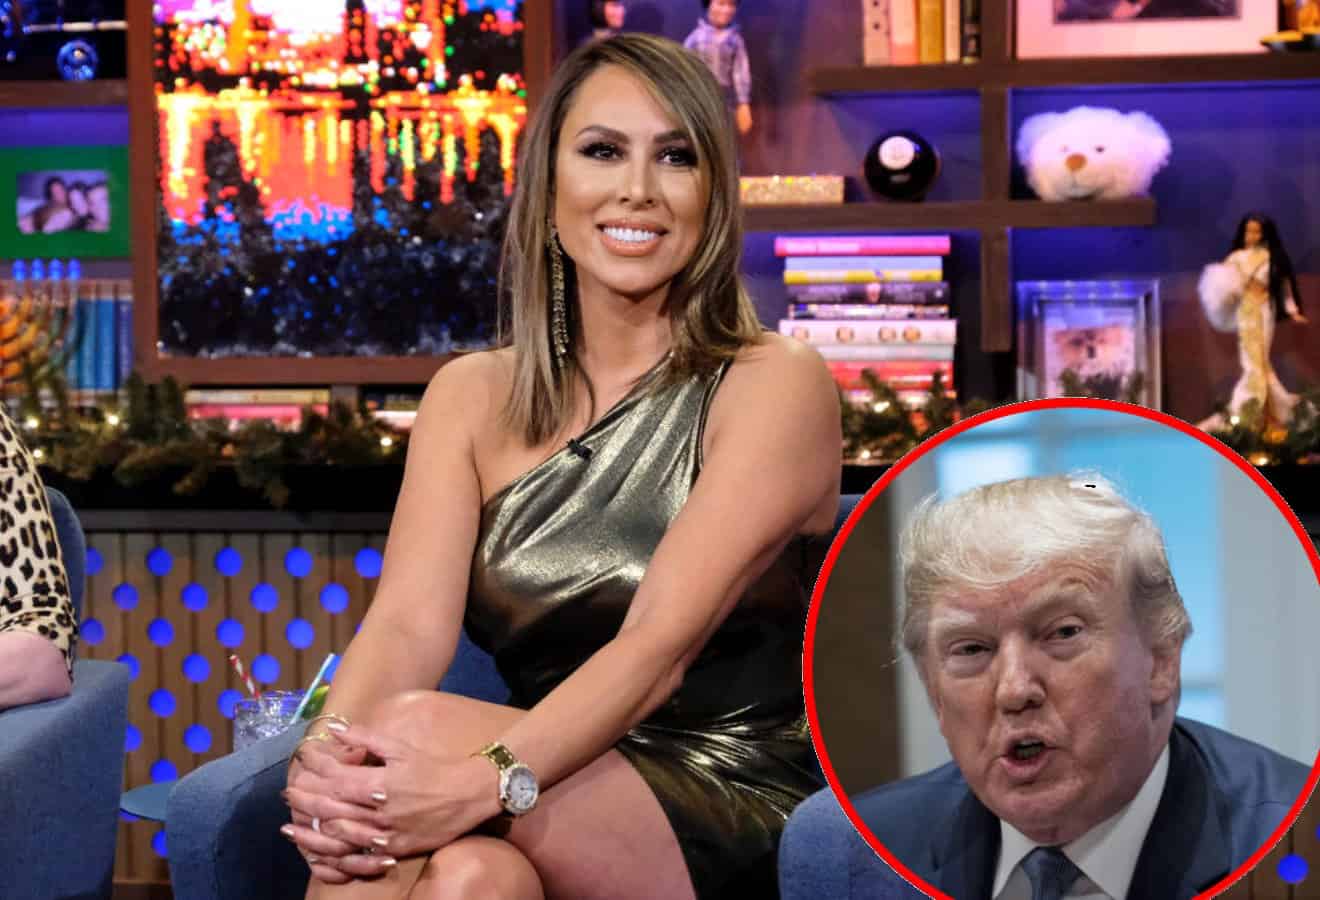 RHOC's Kelly Dodd Reveals if She Voted for President Trump After Facing Backlash Over Photo With His Sons Eric and Donald Jr., Says She Doesn't Understand the Divide in America